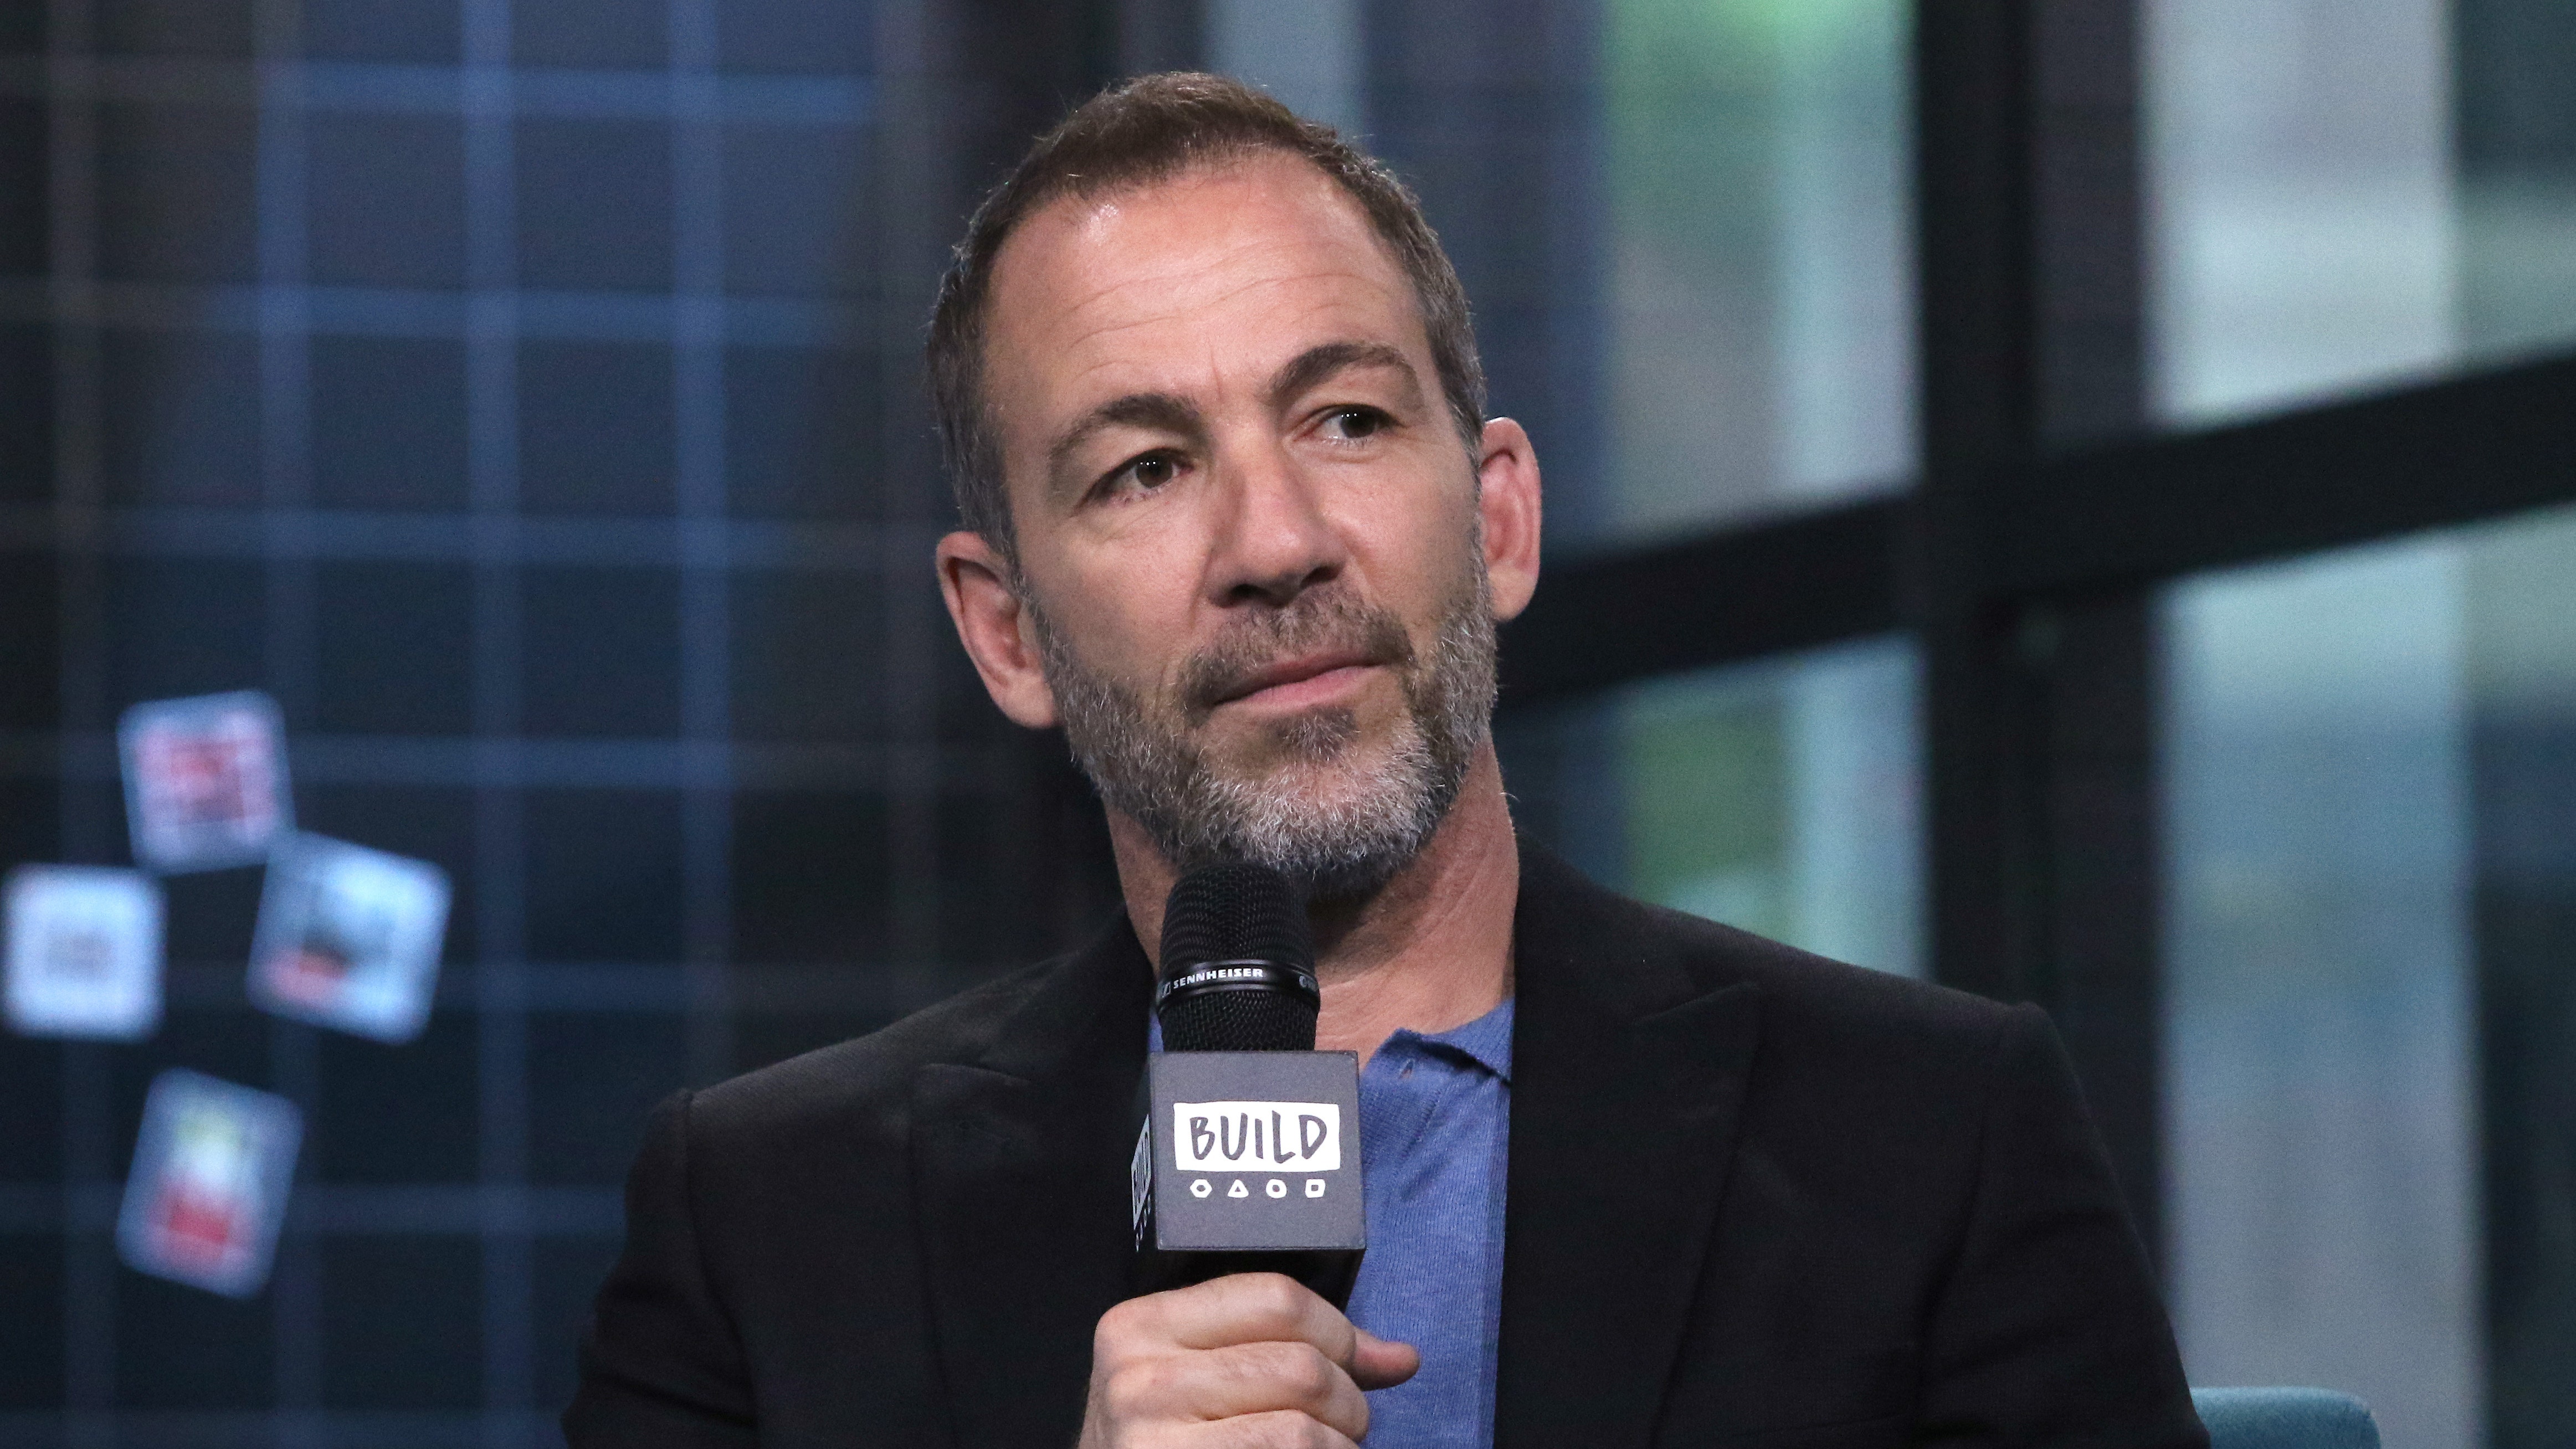 FOX NEWS: Actor Bryan Callen accused of sexual misconduct by multiple women